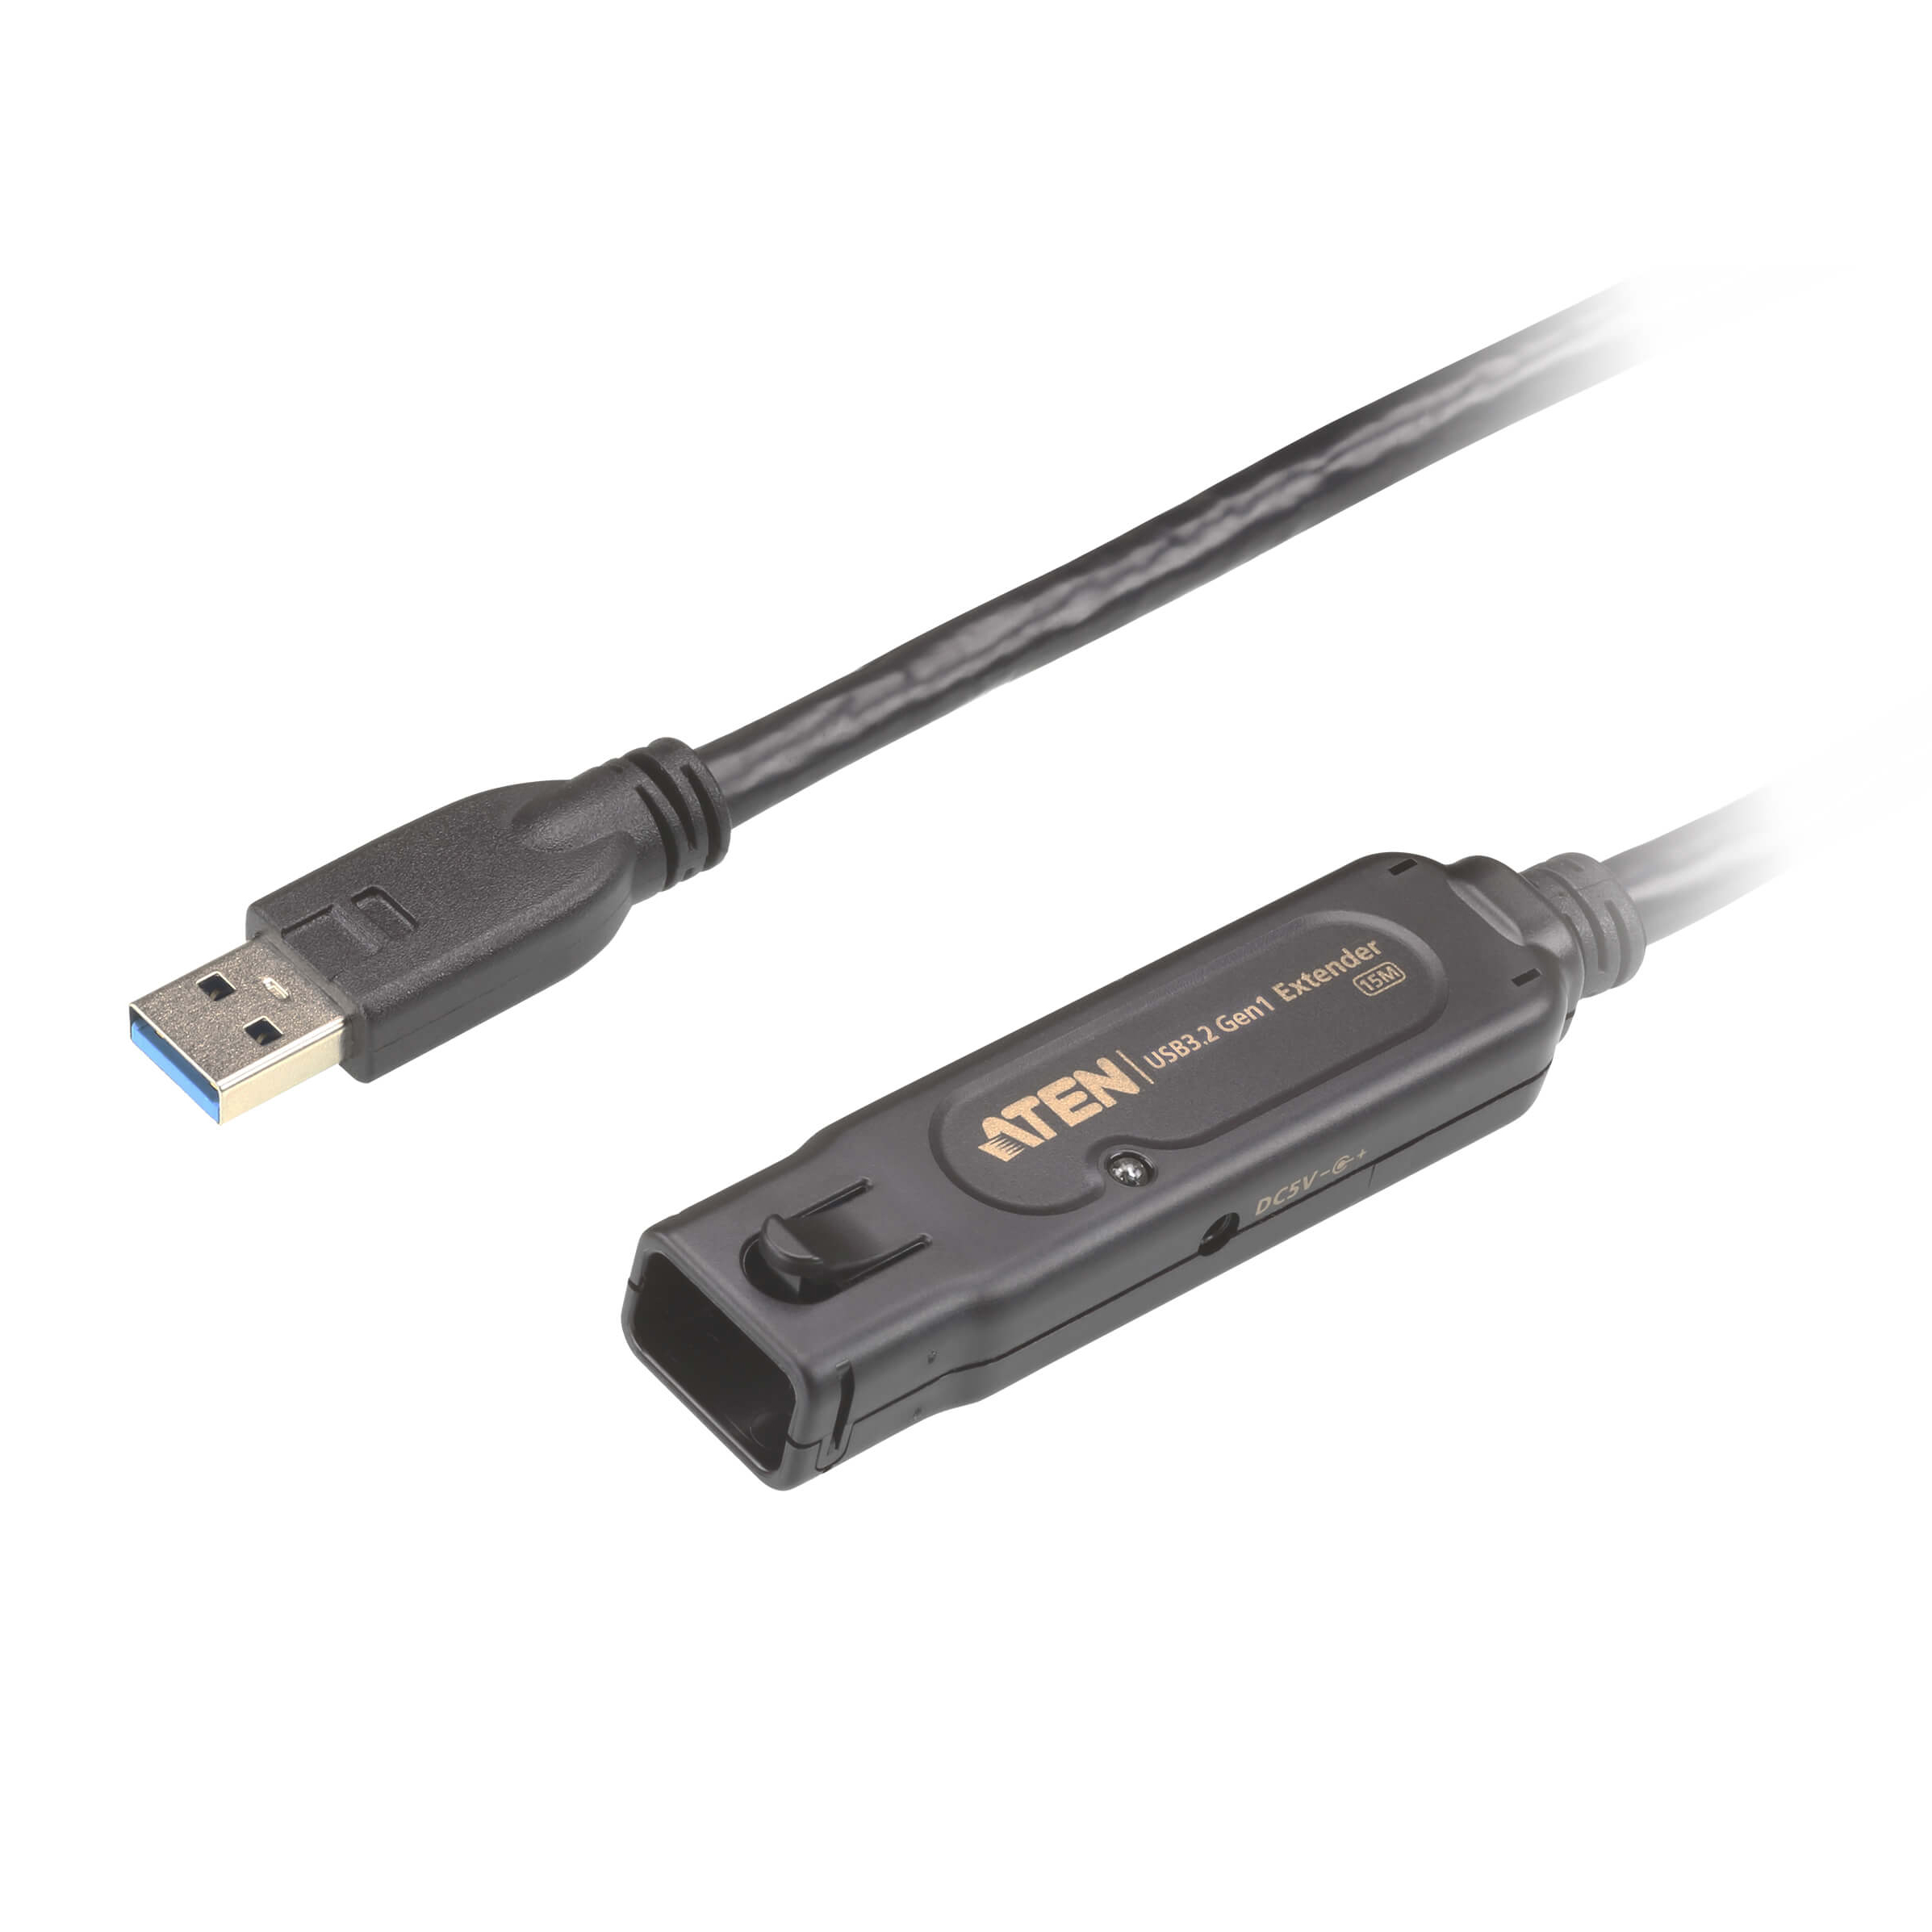 UE3315A  USB 3.0 Extender Cable (15m, Daisy-chain up to 30m)